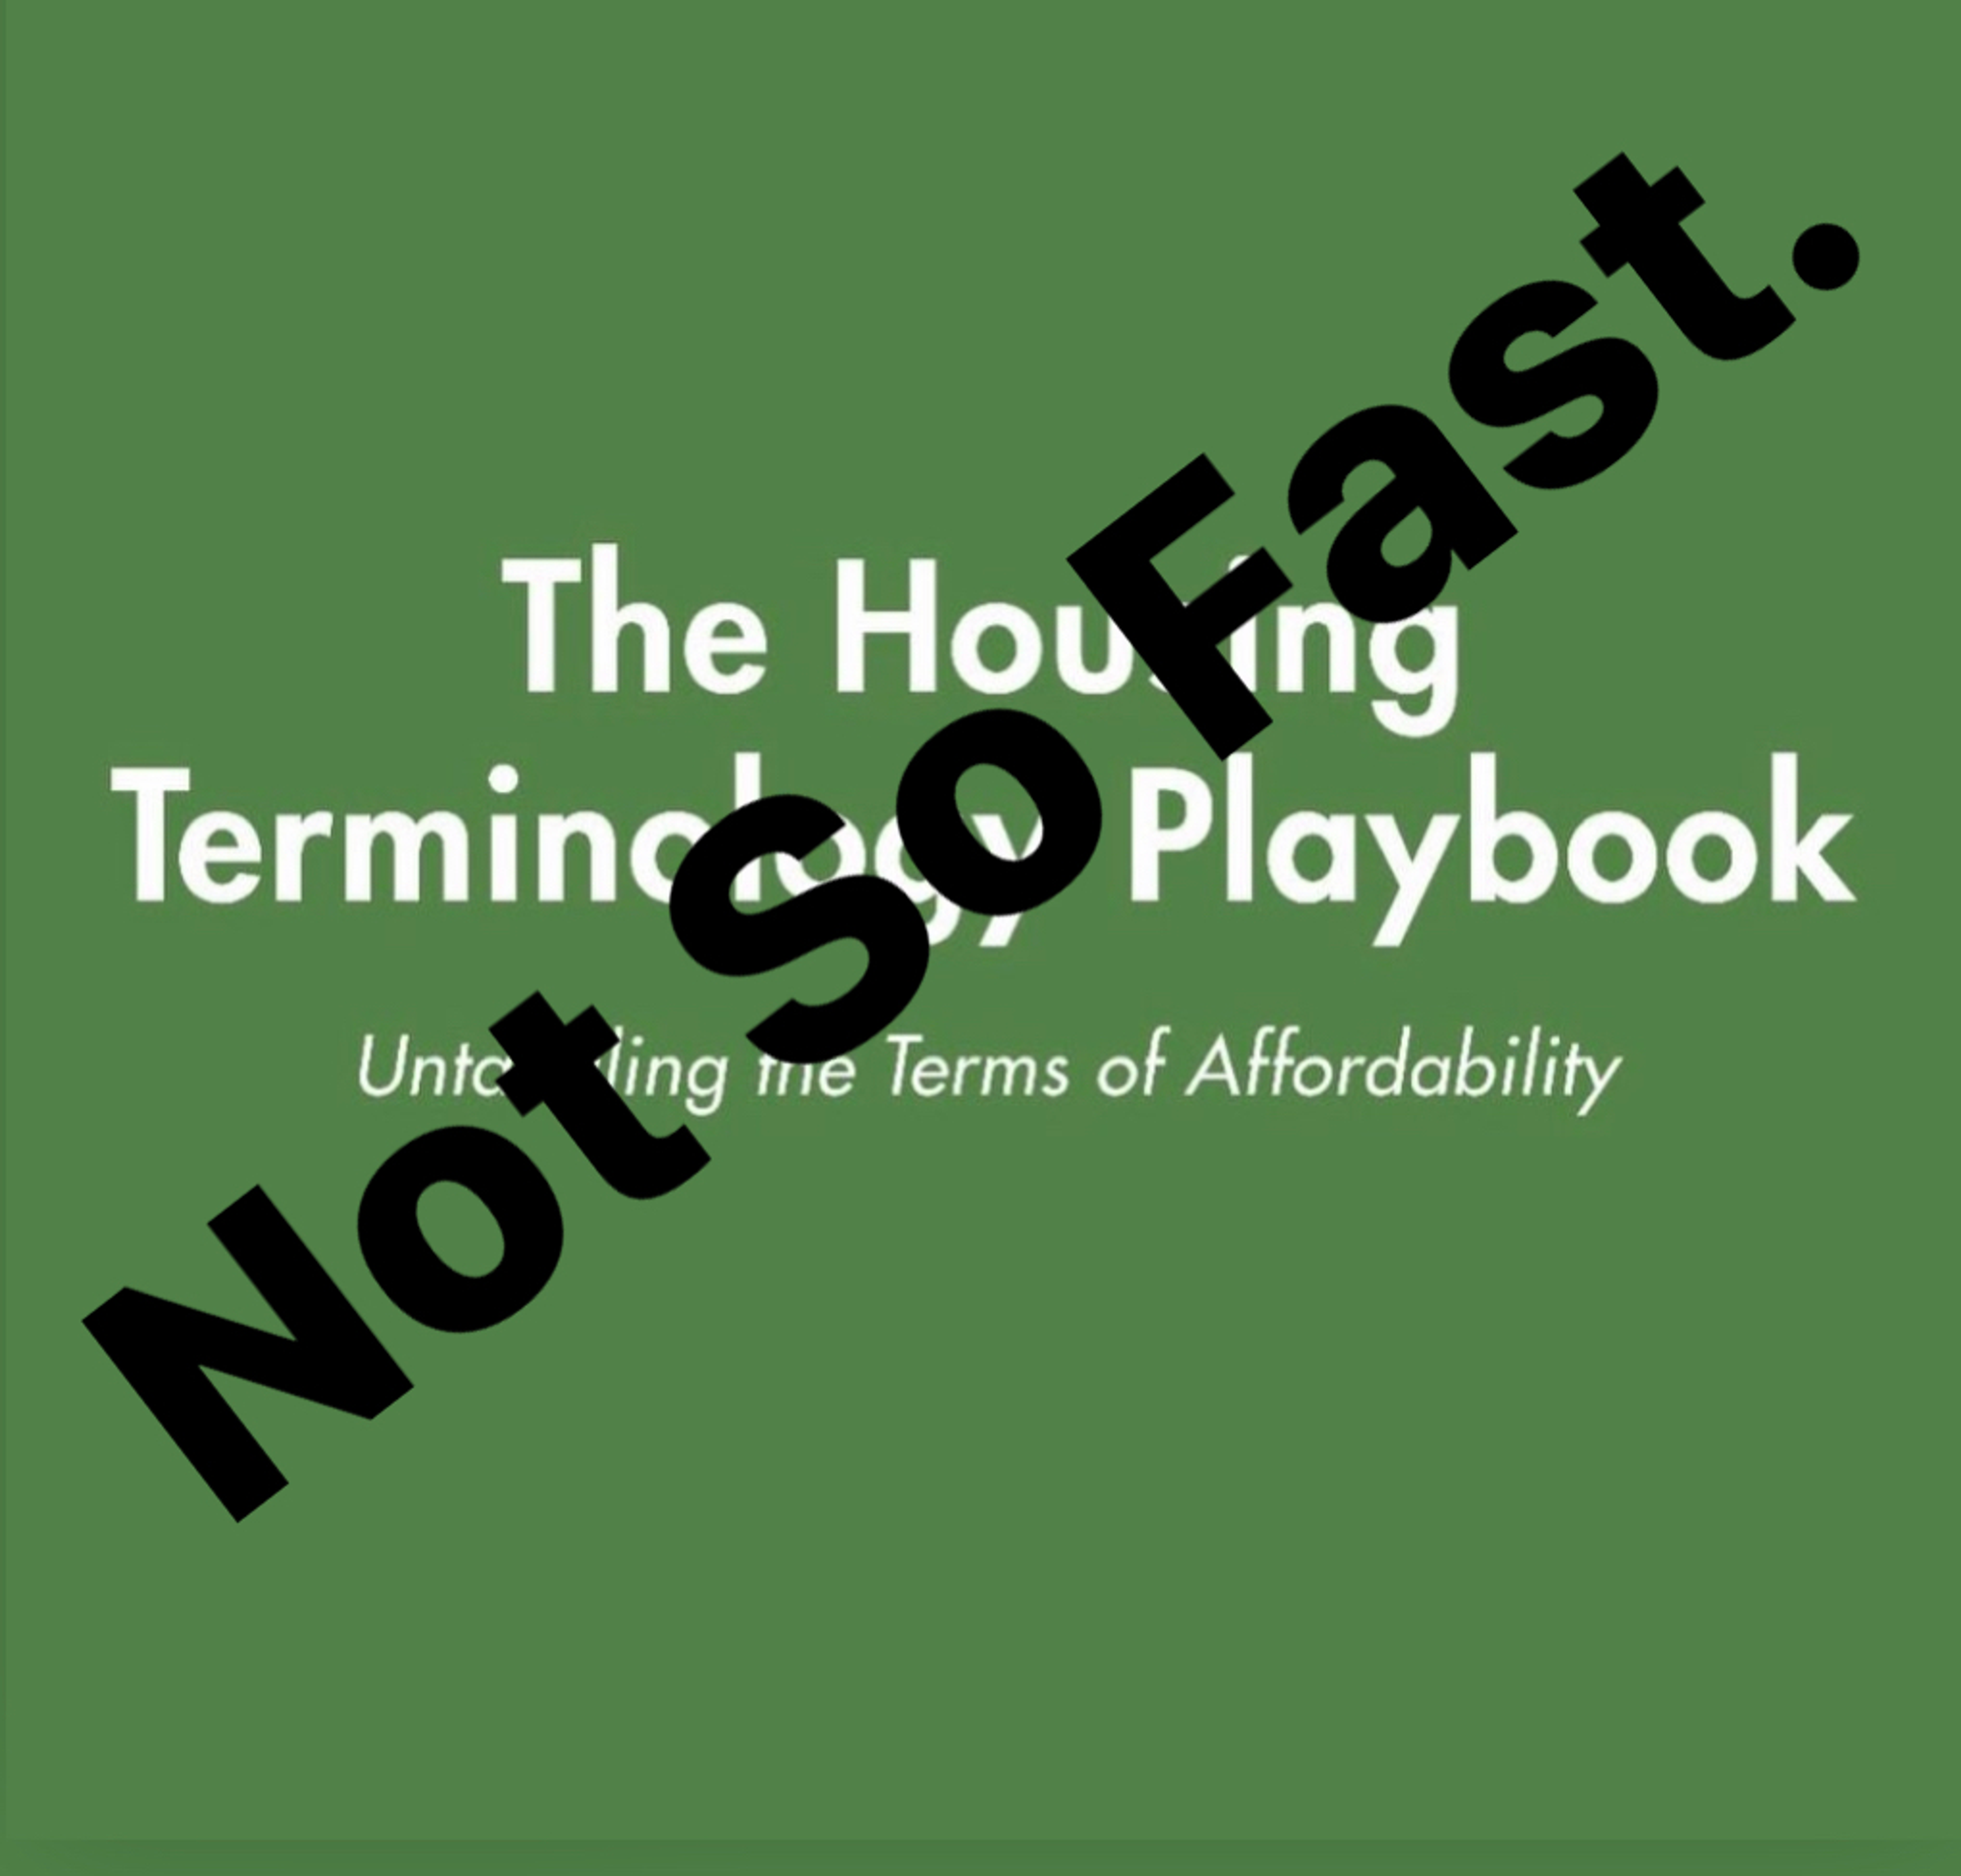 Screenshot of the icon for "The Housing Terminology Playbook" in white letters on a green background, crossed by "Not So Fast" in black letters.